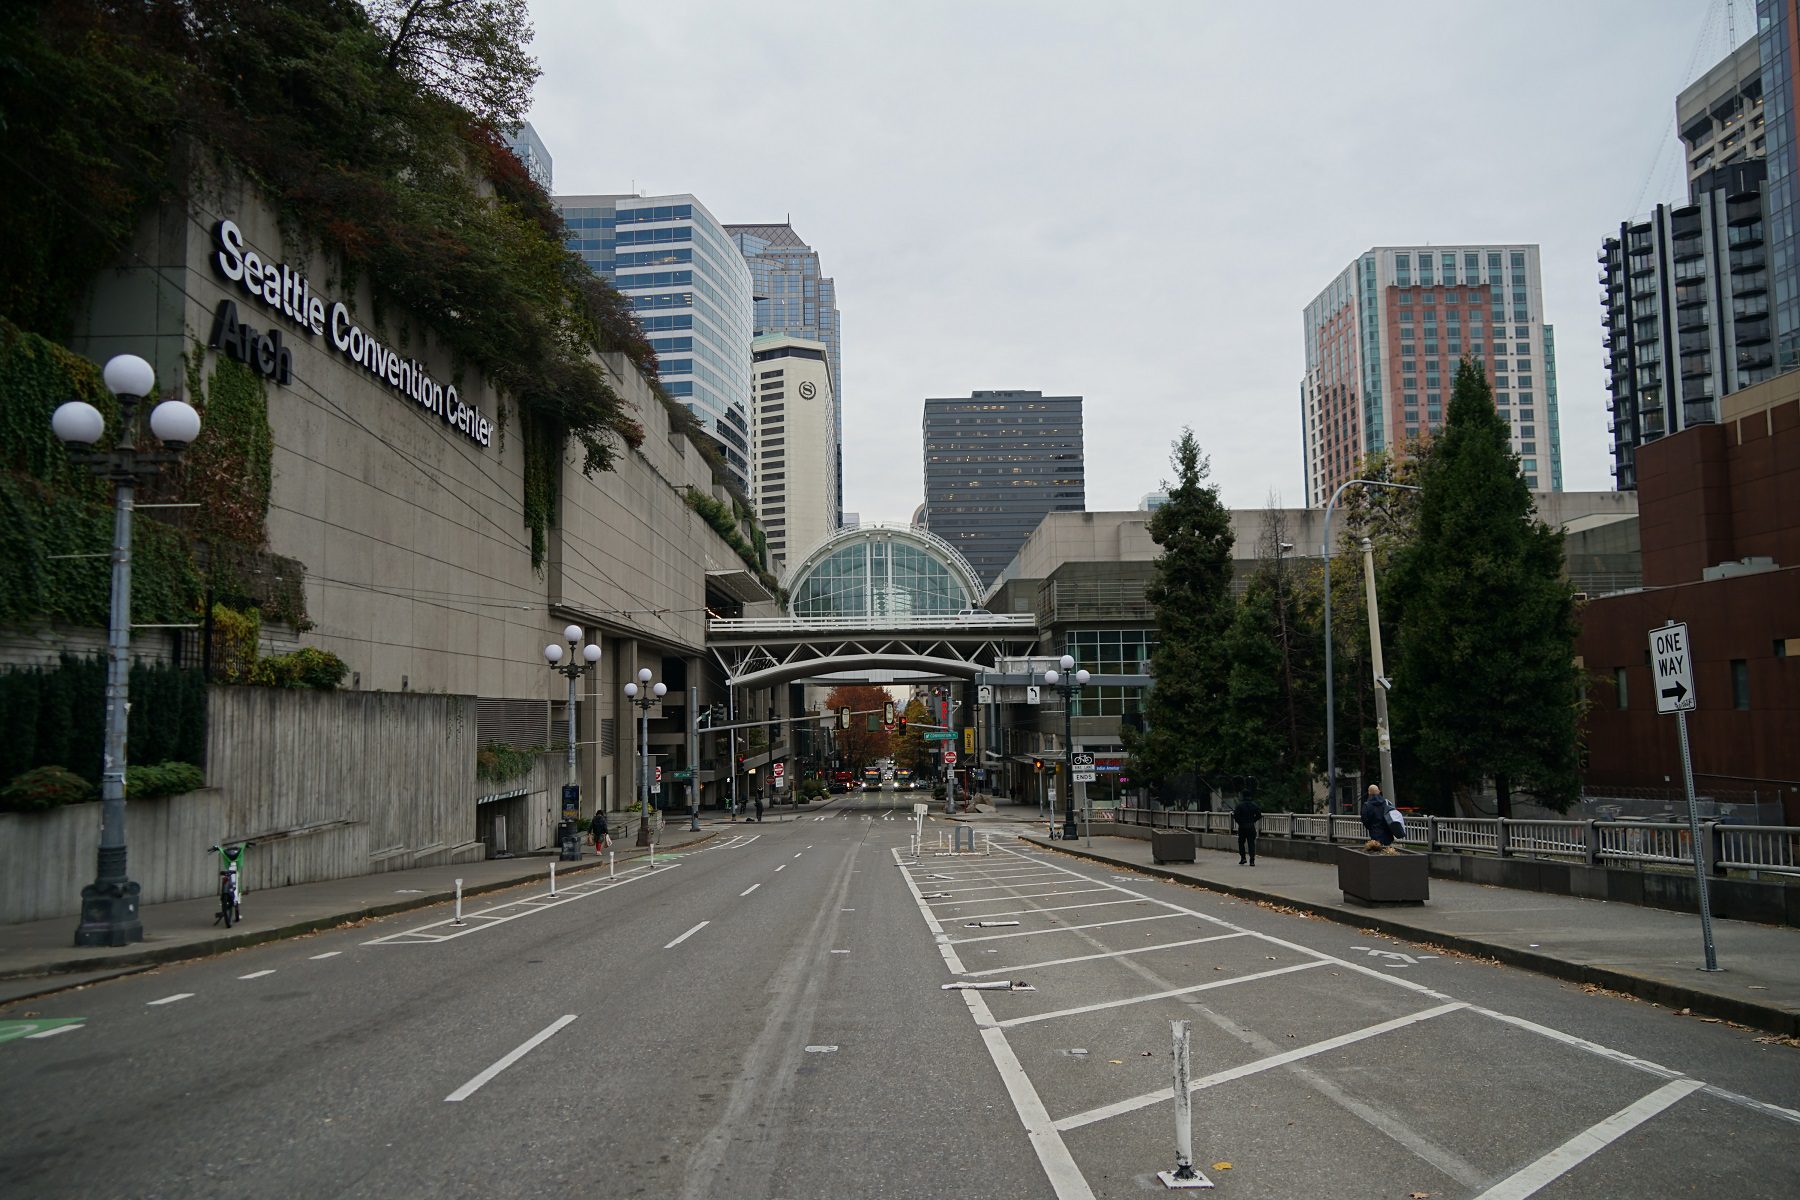 View of a street with large buildings in the background on a cloudy day.